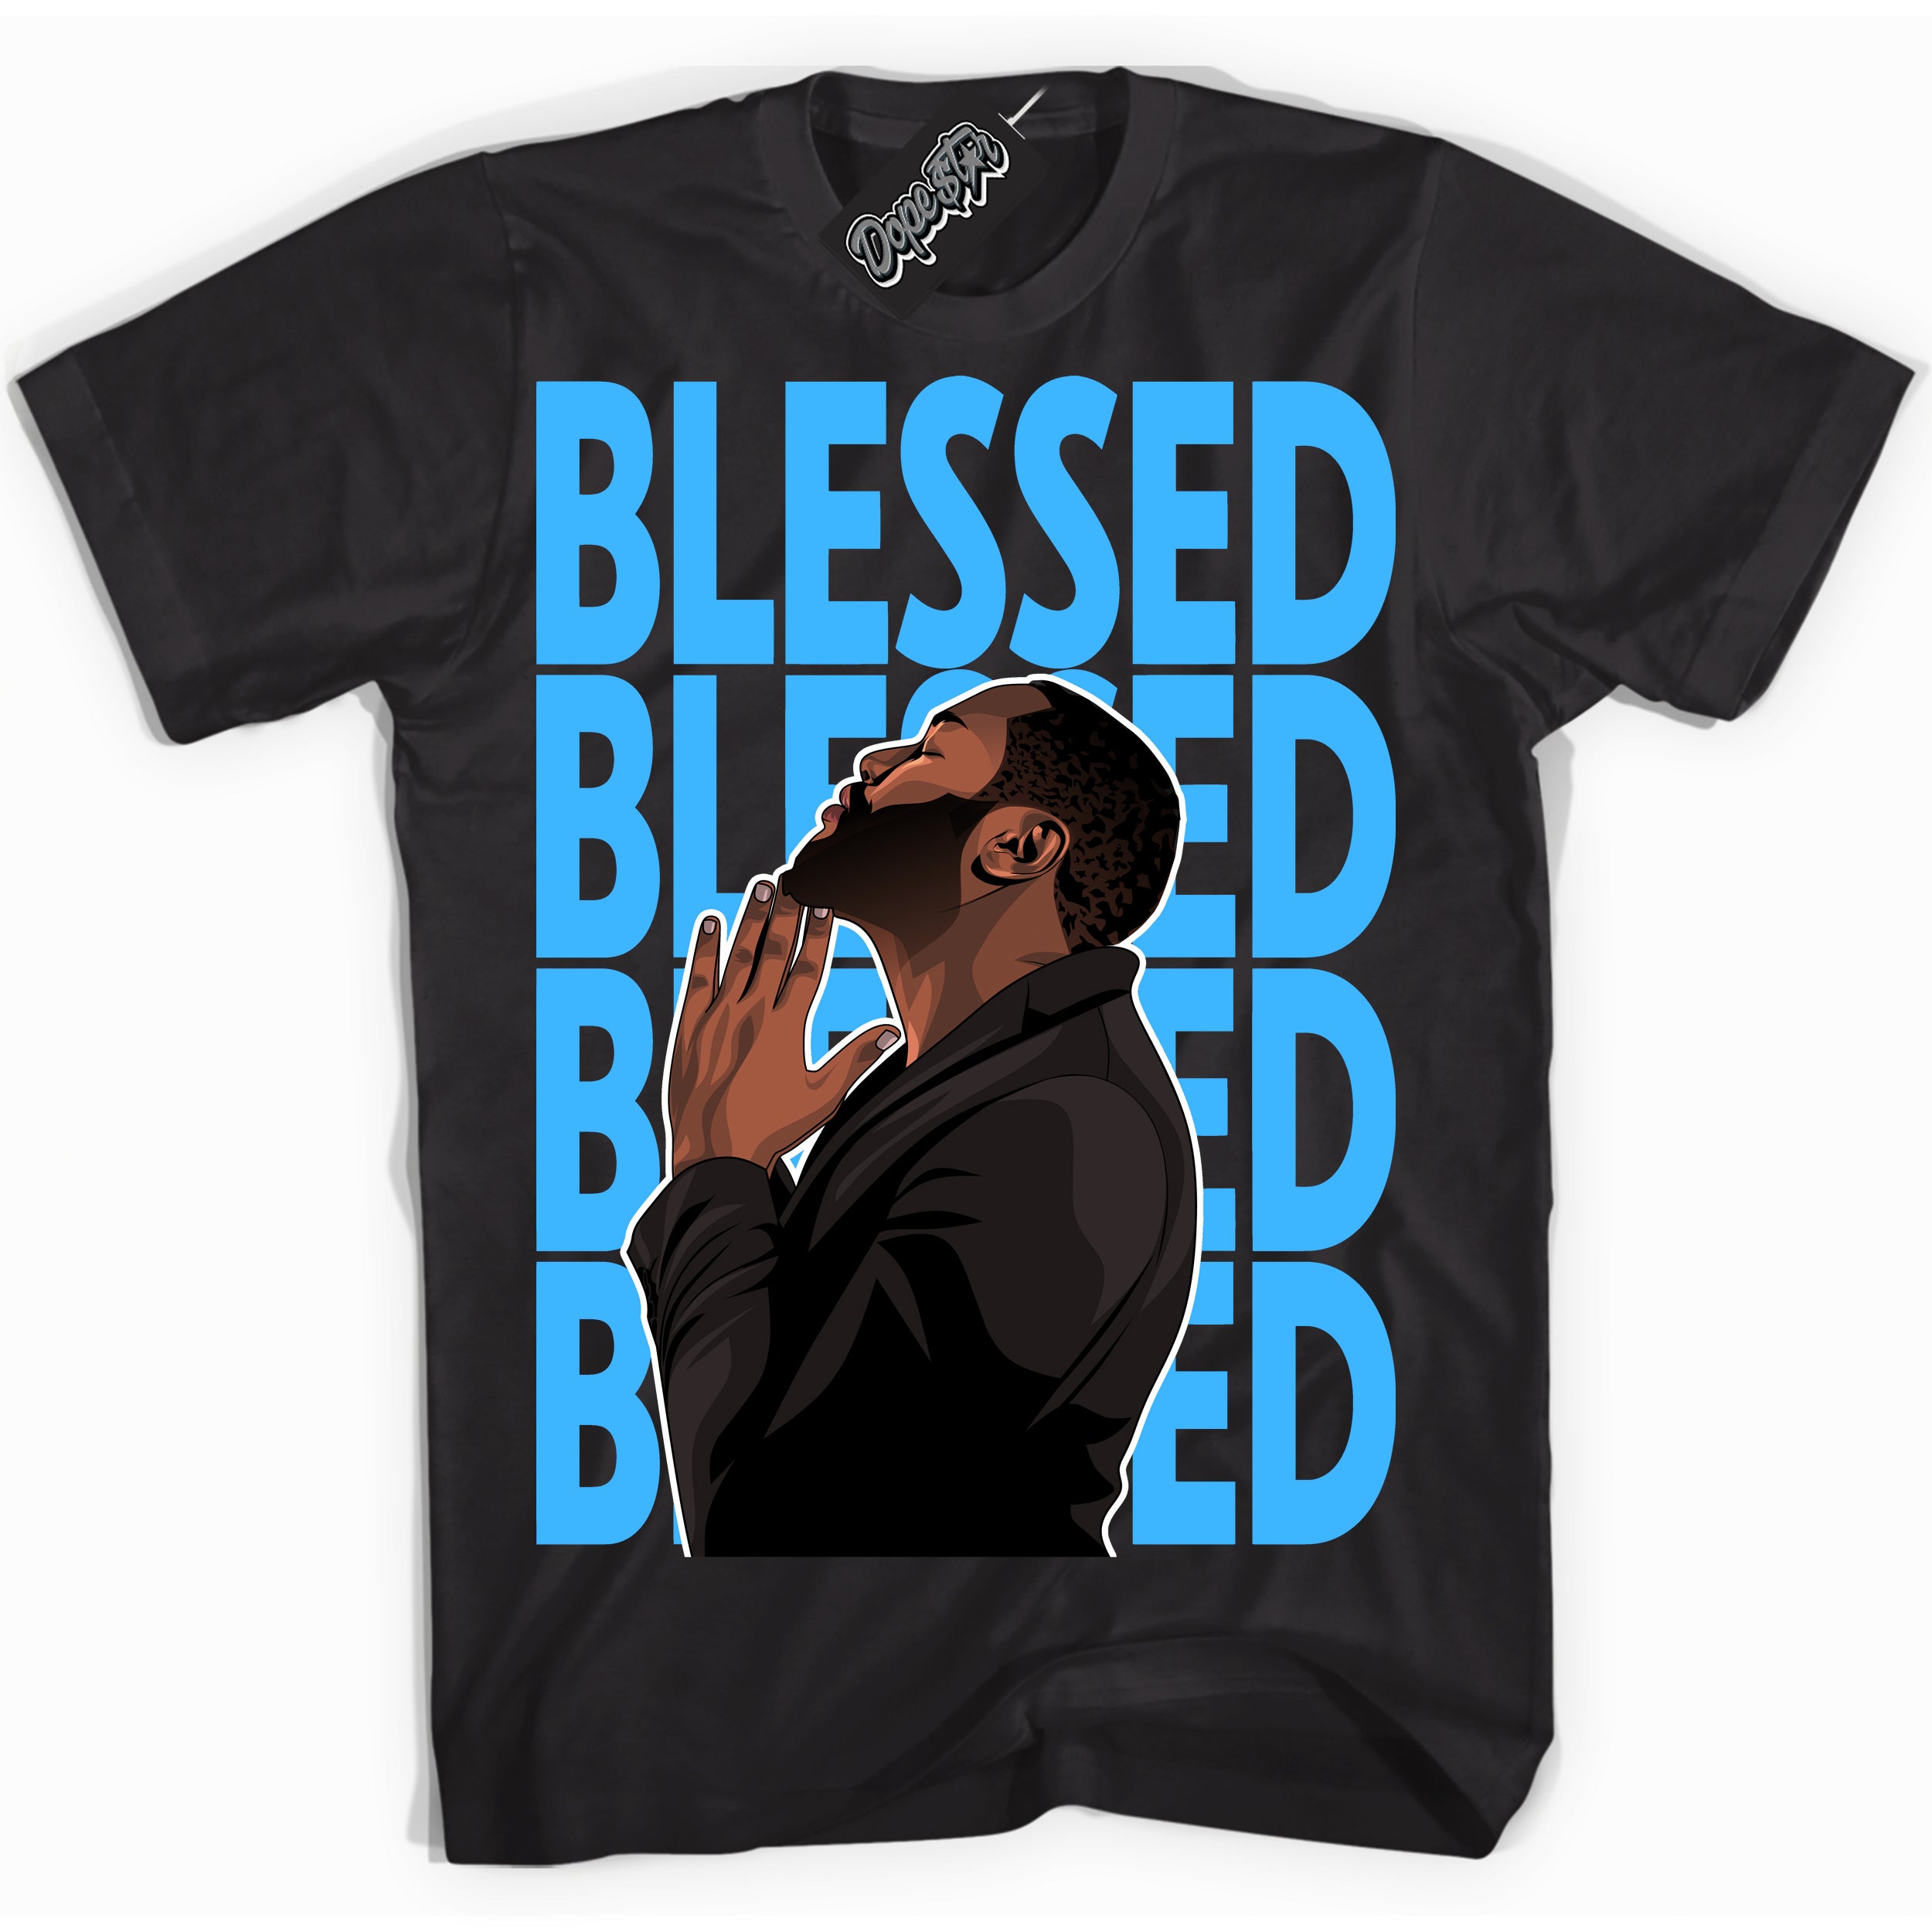 Cool Black graphic tee with “ God Blessed ” design, that perfectly matches Powder Blue 9s sneakers 